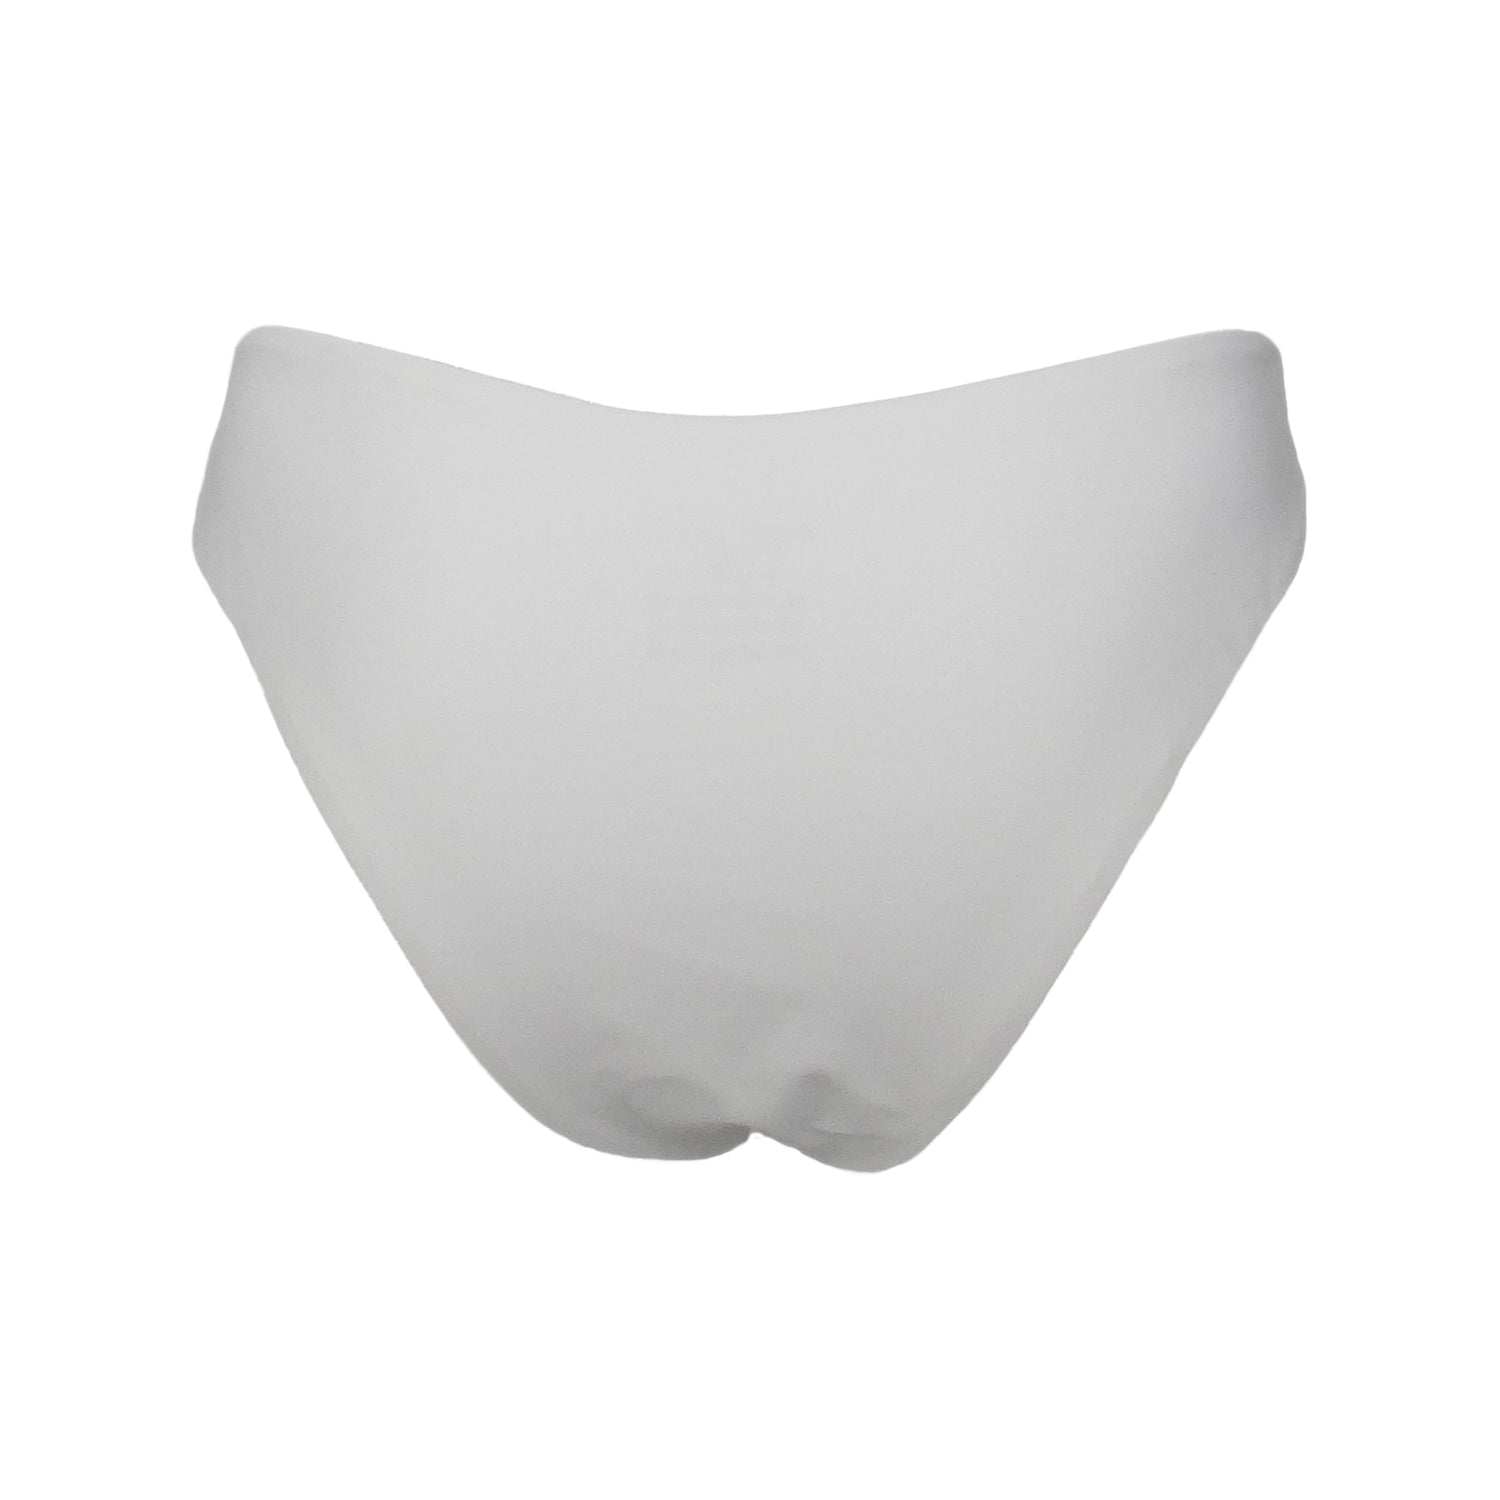 Back view of white low rise bikini bottom with left side adjustable gold belt buckle strap and cheeky bum coverage.